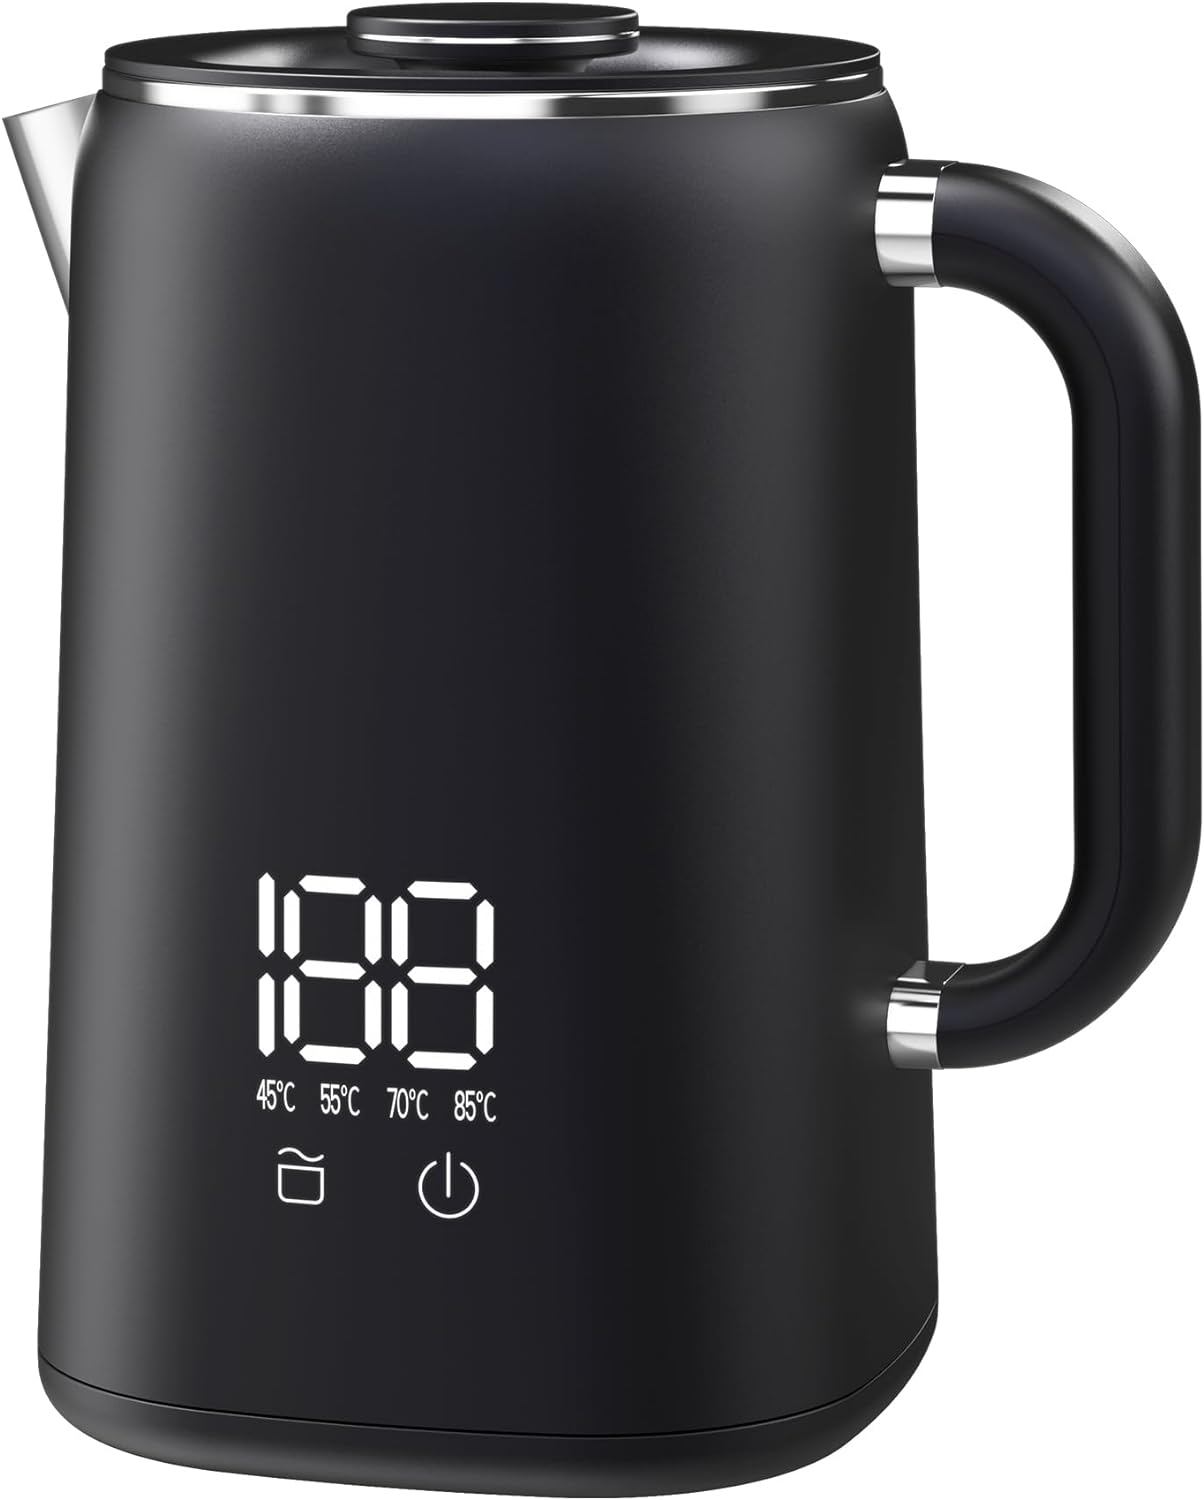 OMISOON Electric Kettle Stainless Steel 1.8L, Kettles Electric with Keep Warm Function, 1500W - 1800W Rapid Boil, Auto Shut - Off and Boil - Dry Protection, Black - Amazing Gadgets Outlet